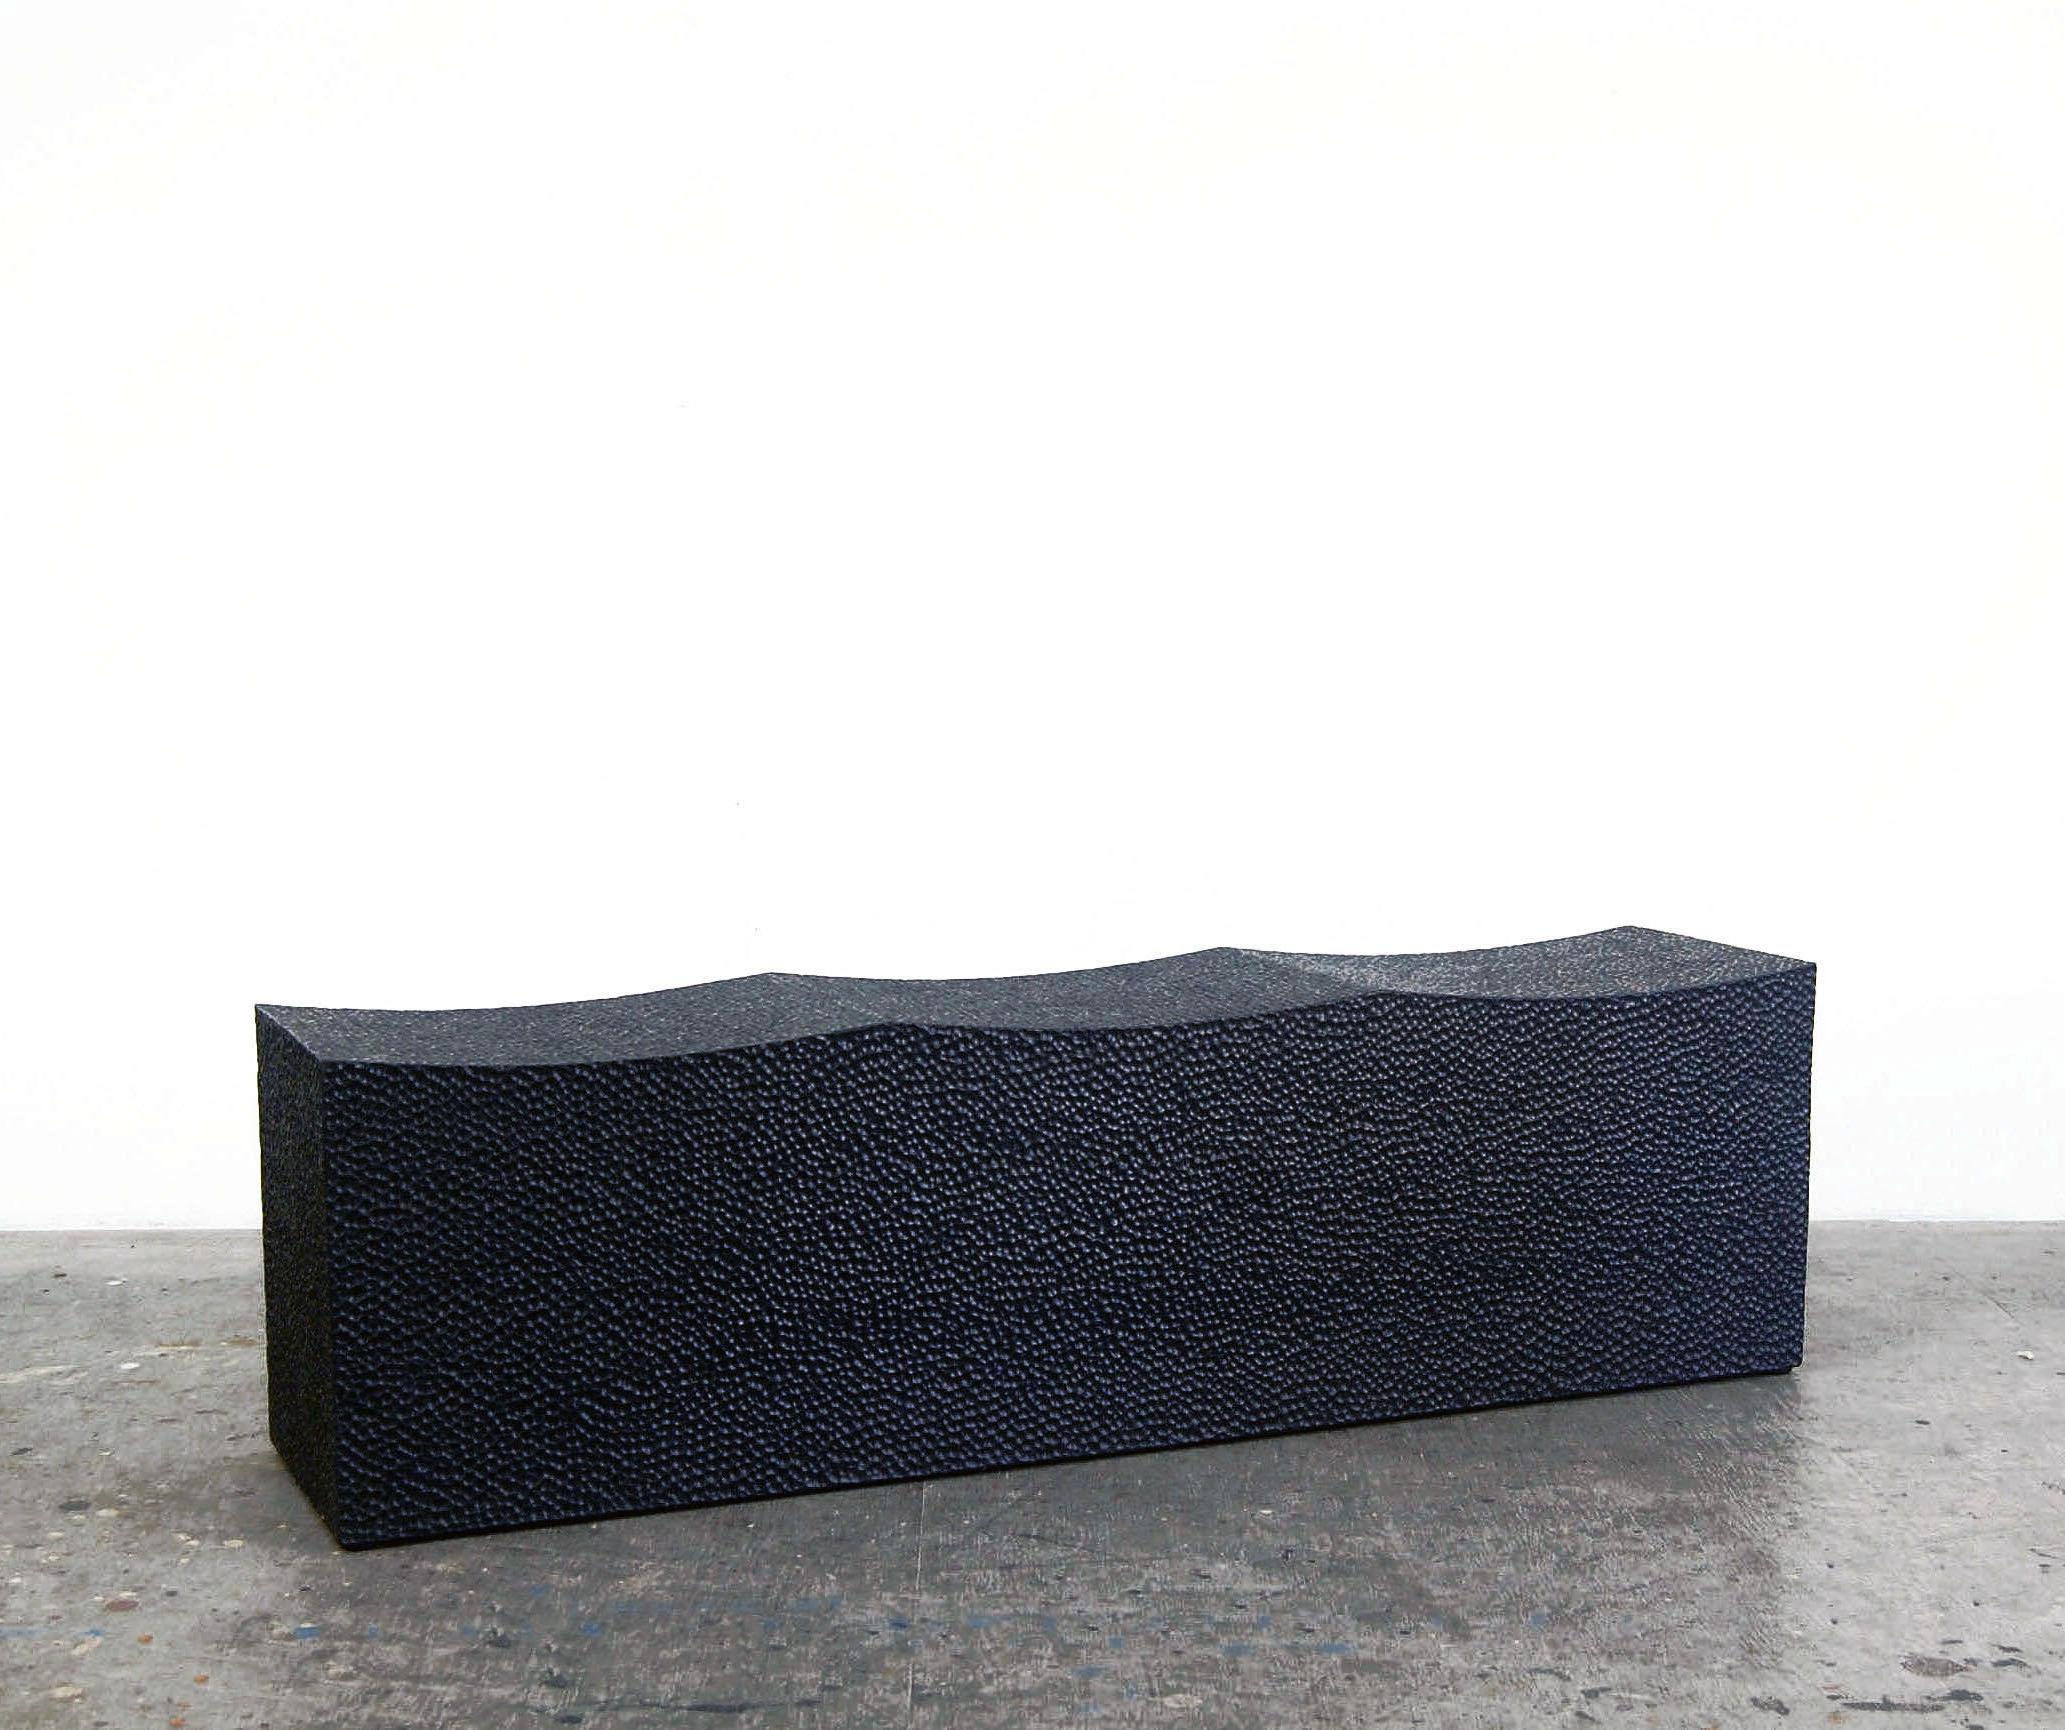 Maple block bench for three by John Eric Byers
Dimensions: 43 x 101.6 x 35.5 cm
Materials: Carved blackened maple

All works are individually handmade to order.

John Eric Byers creates geometrically inspired pieces that are minimal,